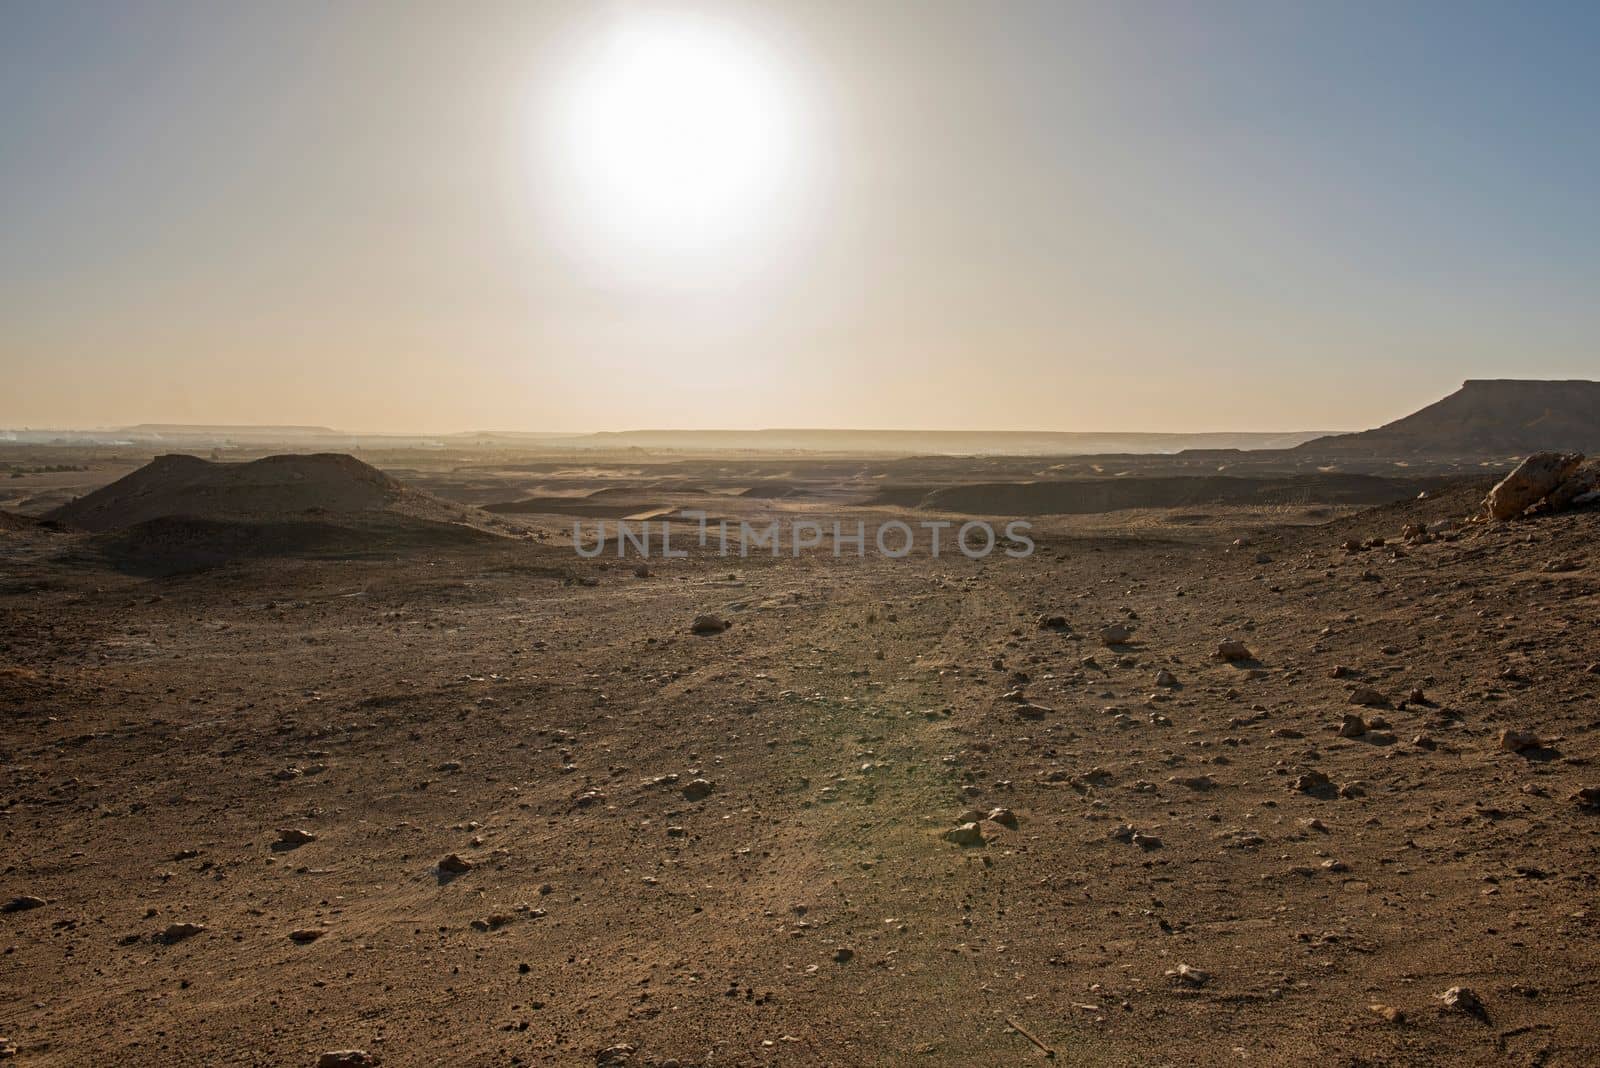 Landscape scenic view of desolate barren rocky western desert in Egypt with mountains at sunrise